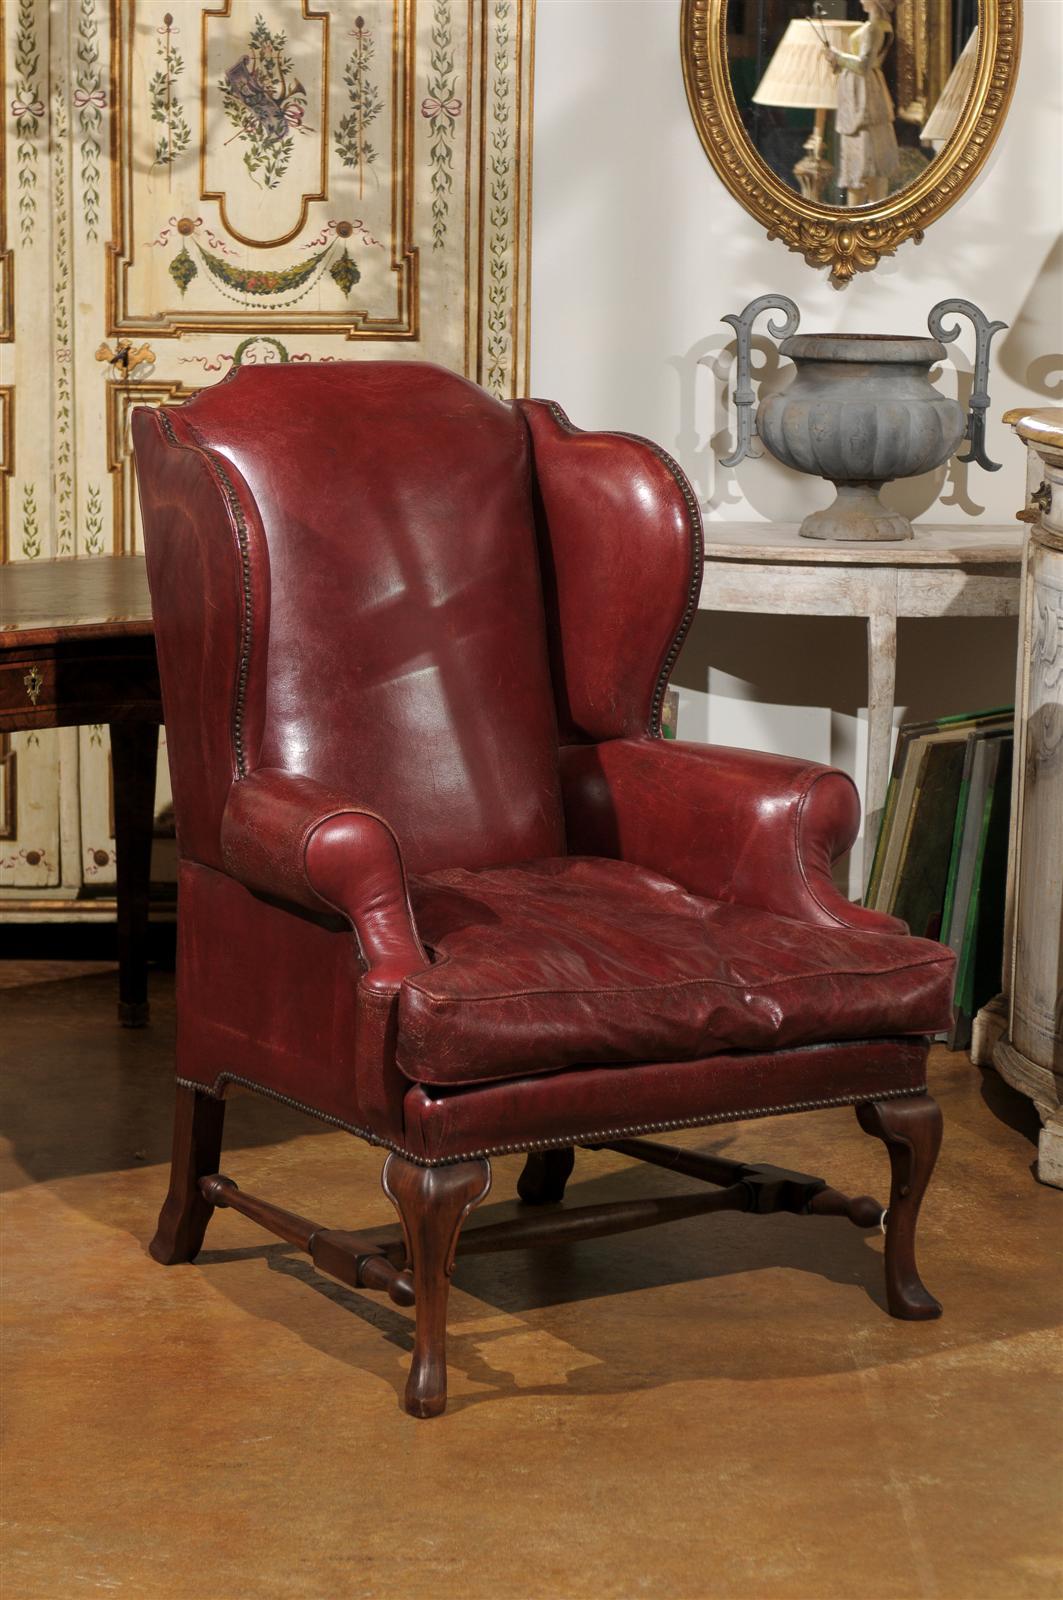 Late 19th century English wingback chair, the red leather upholstered shaped back surmounting a conforming seat, raised on cabriole legs and joined by an H-form stretcher, with nail trim throughout.